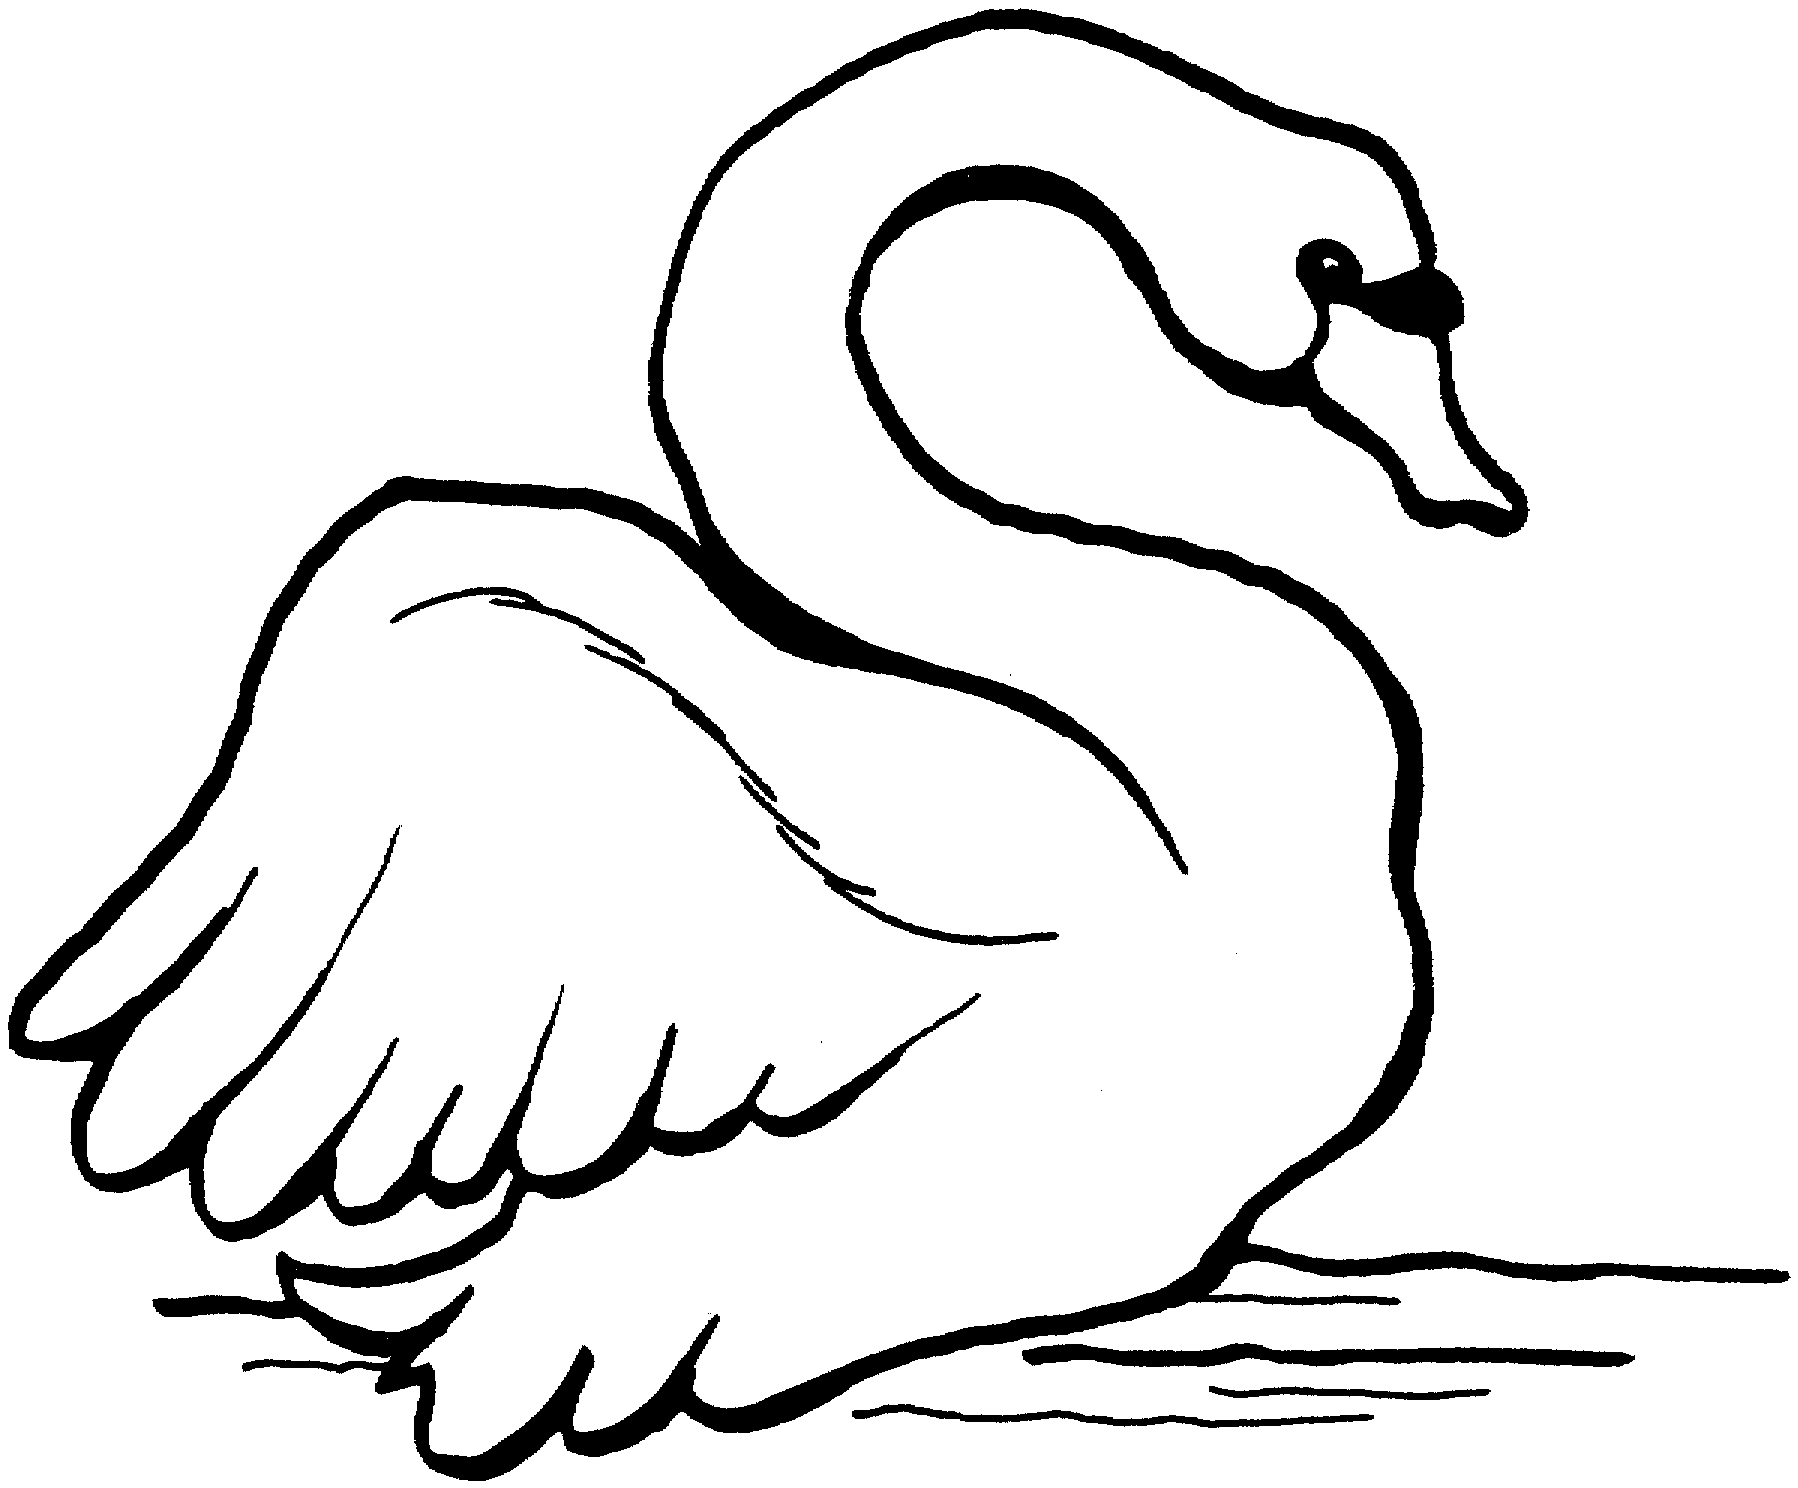 Creative Swan Drawing Sketch From Cildrens Book with simple drawing